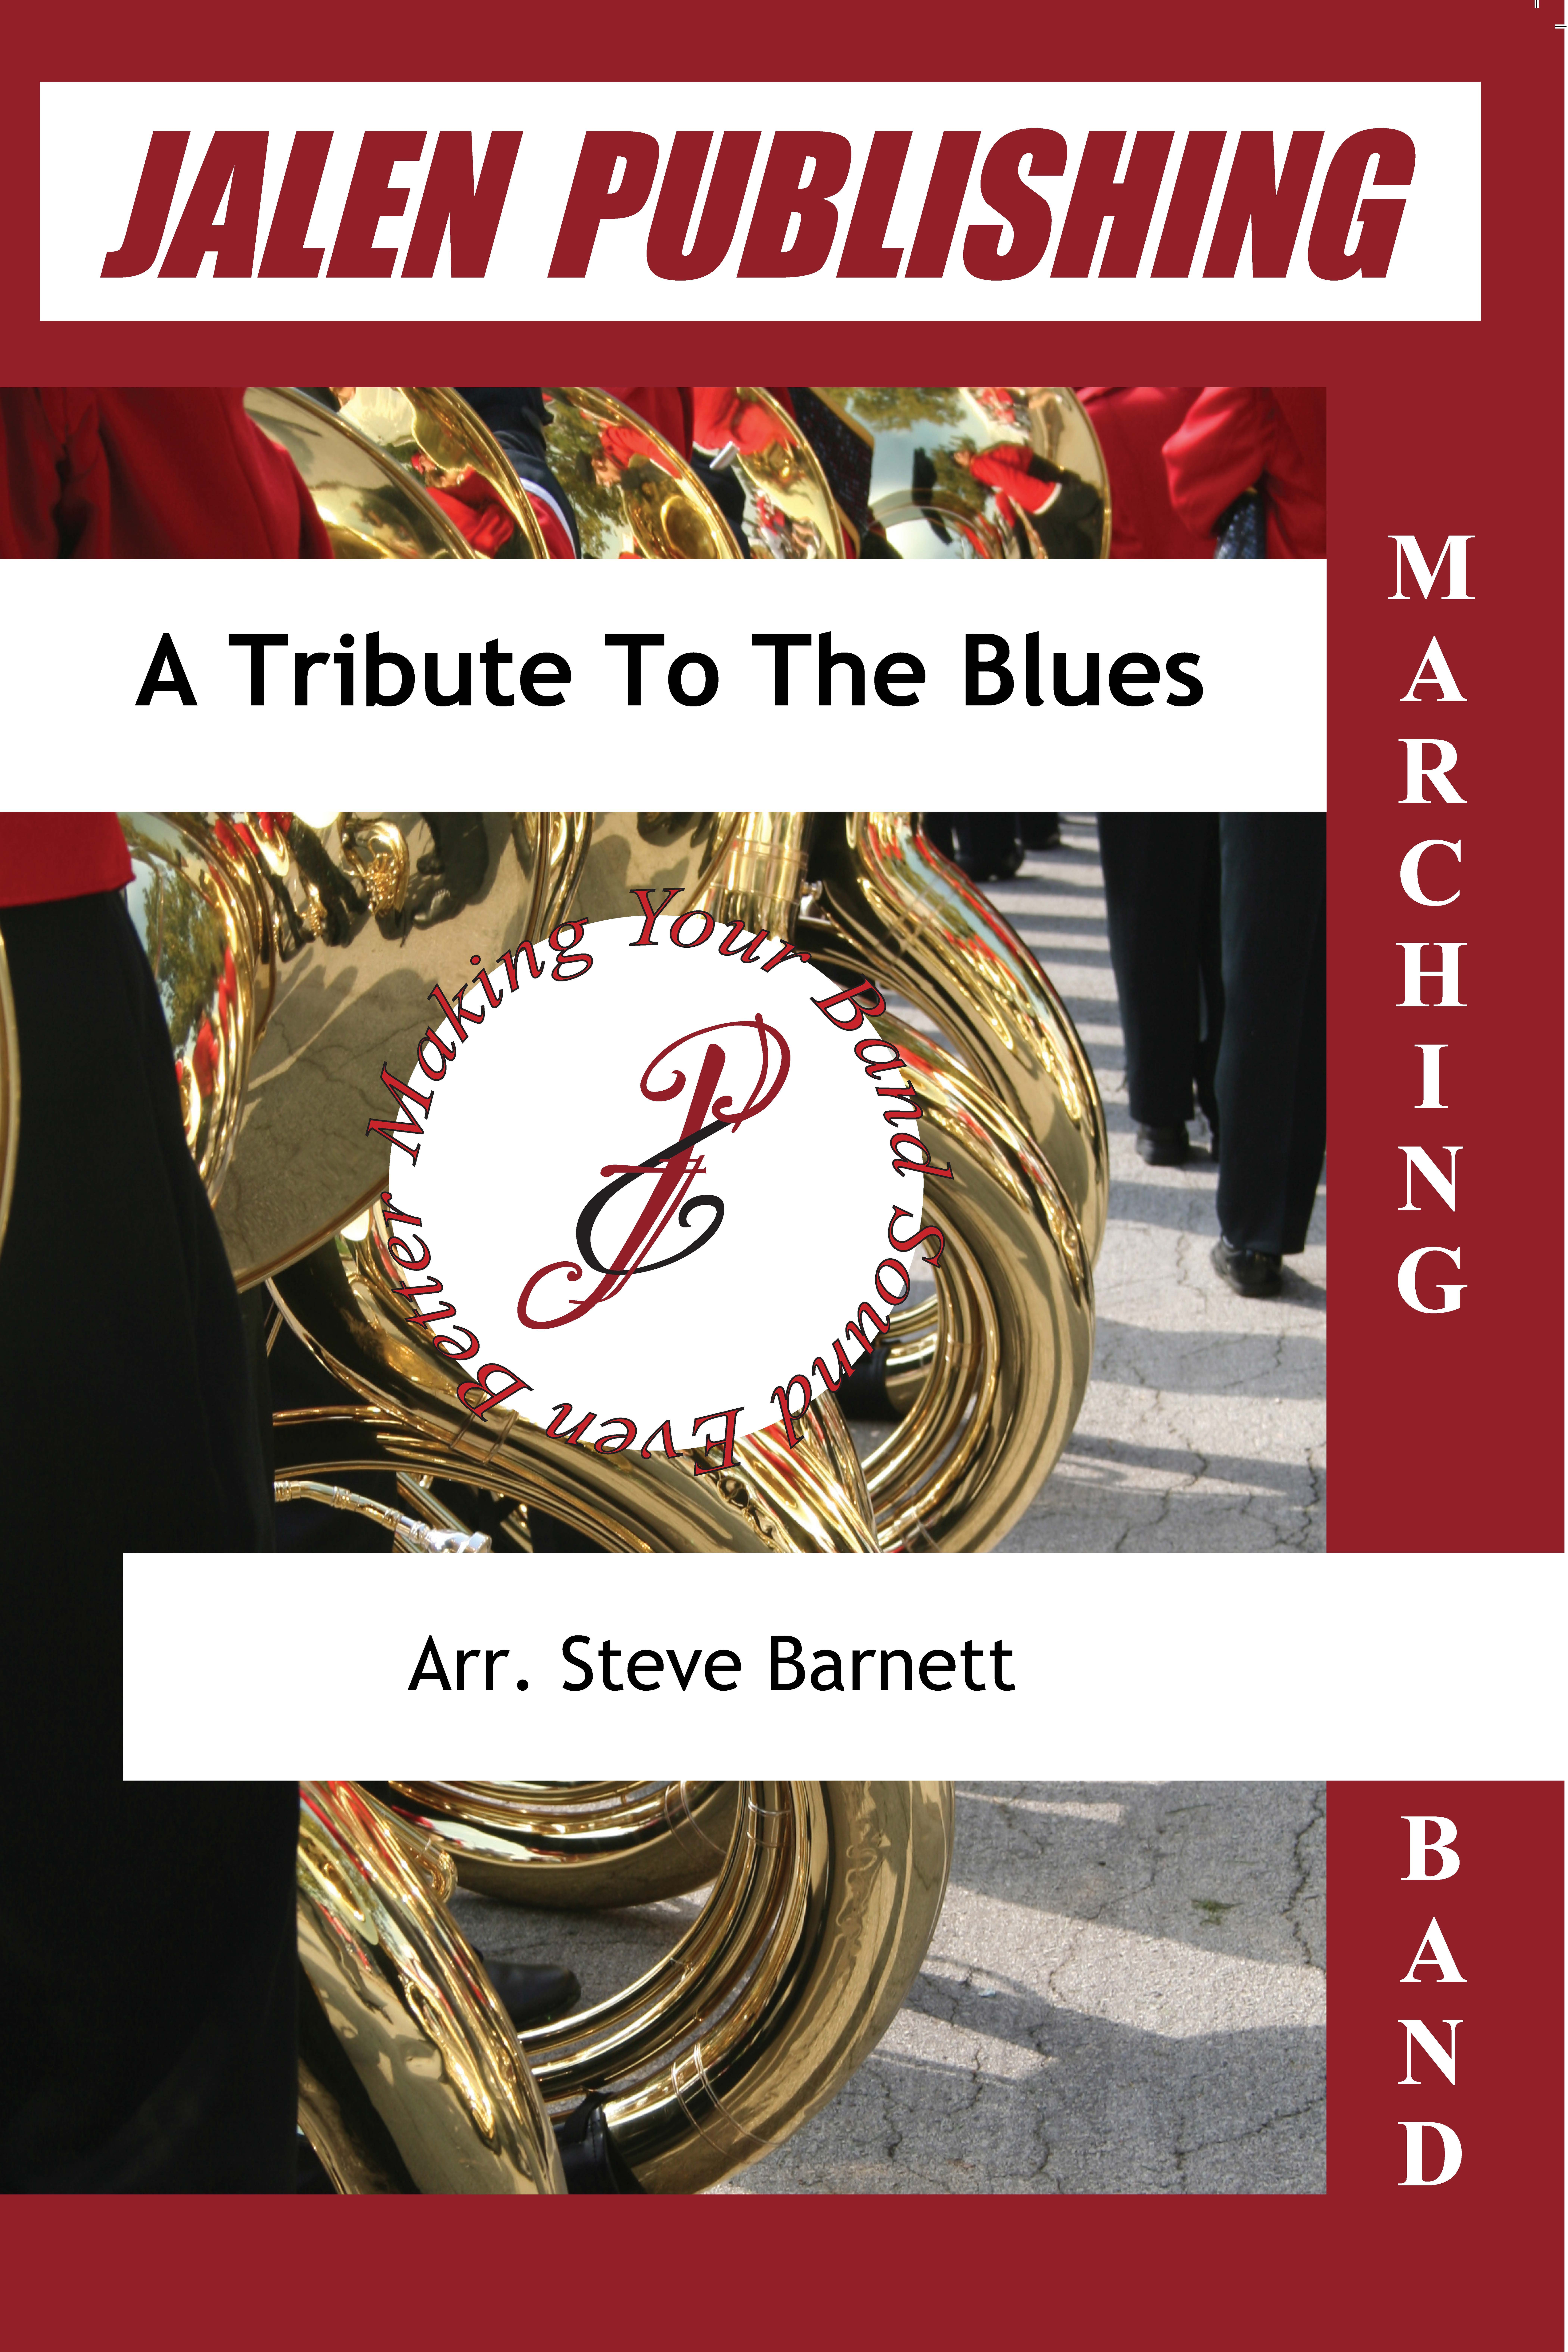 A Tribute To The Blues